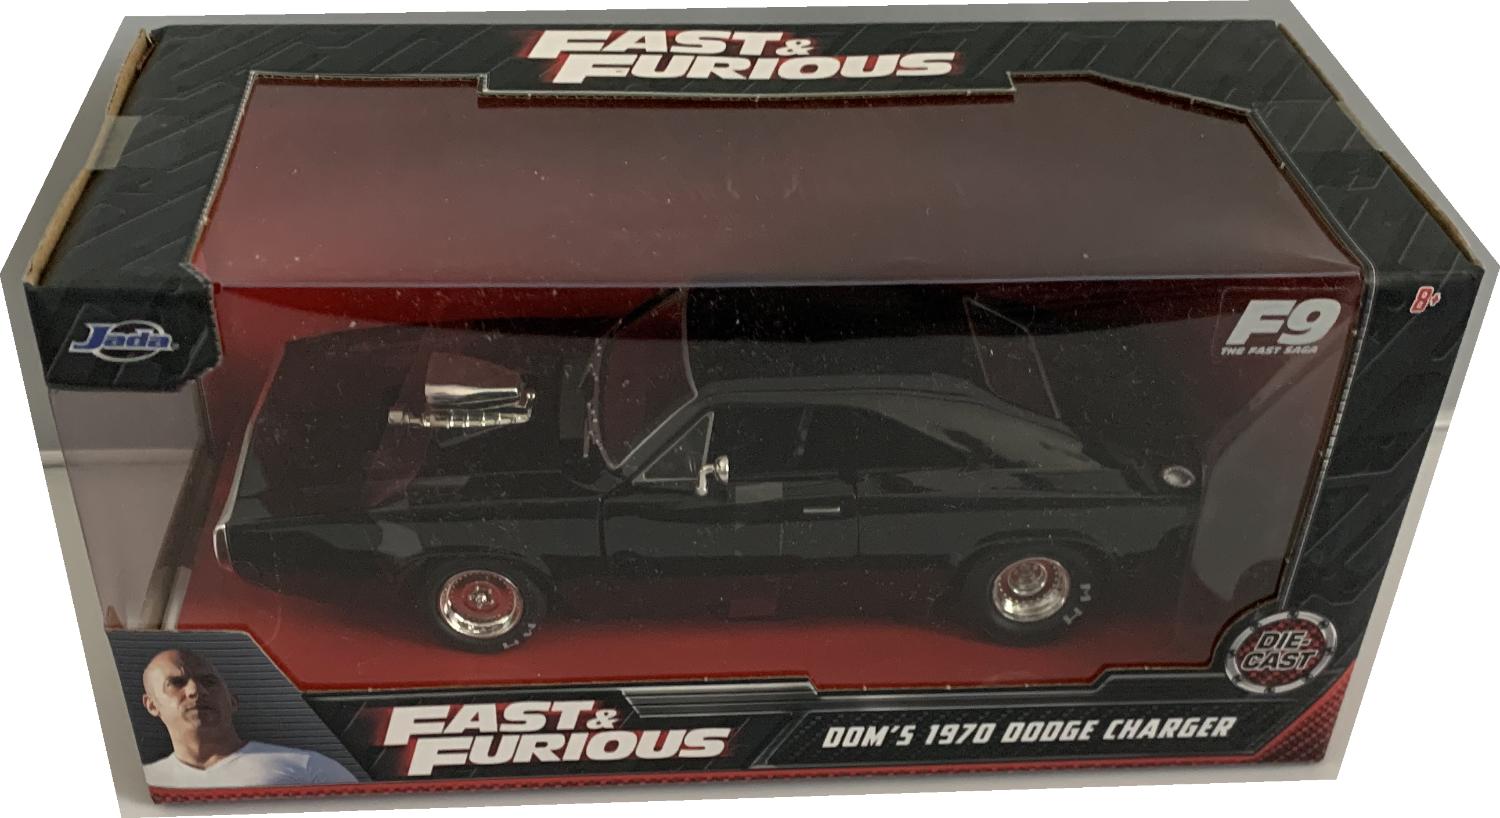 An excellent reproduction of the Dodge Charger with high level of detail throughout, all authentically recreated.  Model is presented in a window display box in Fast and Furious themed boxed packaging.